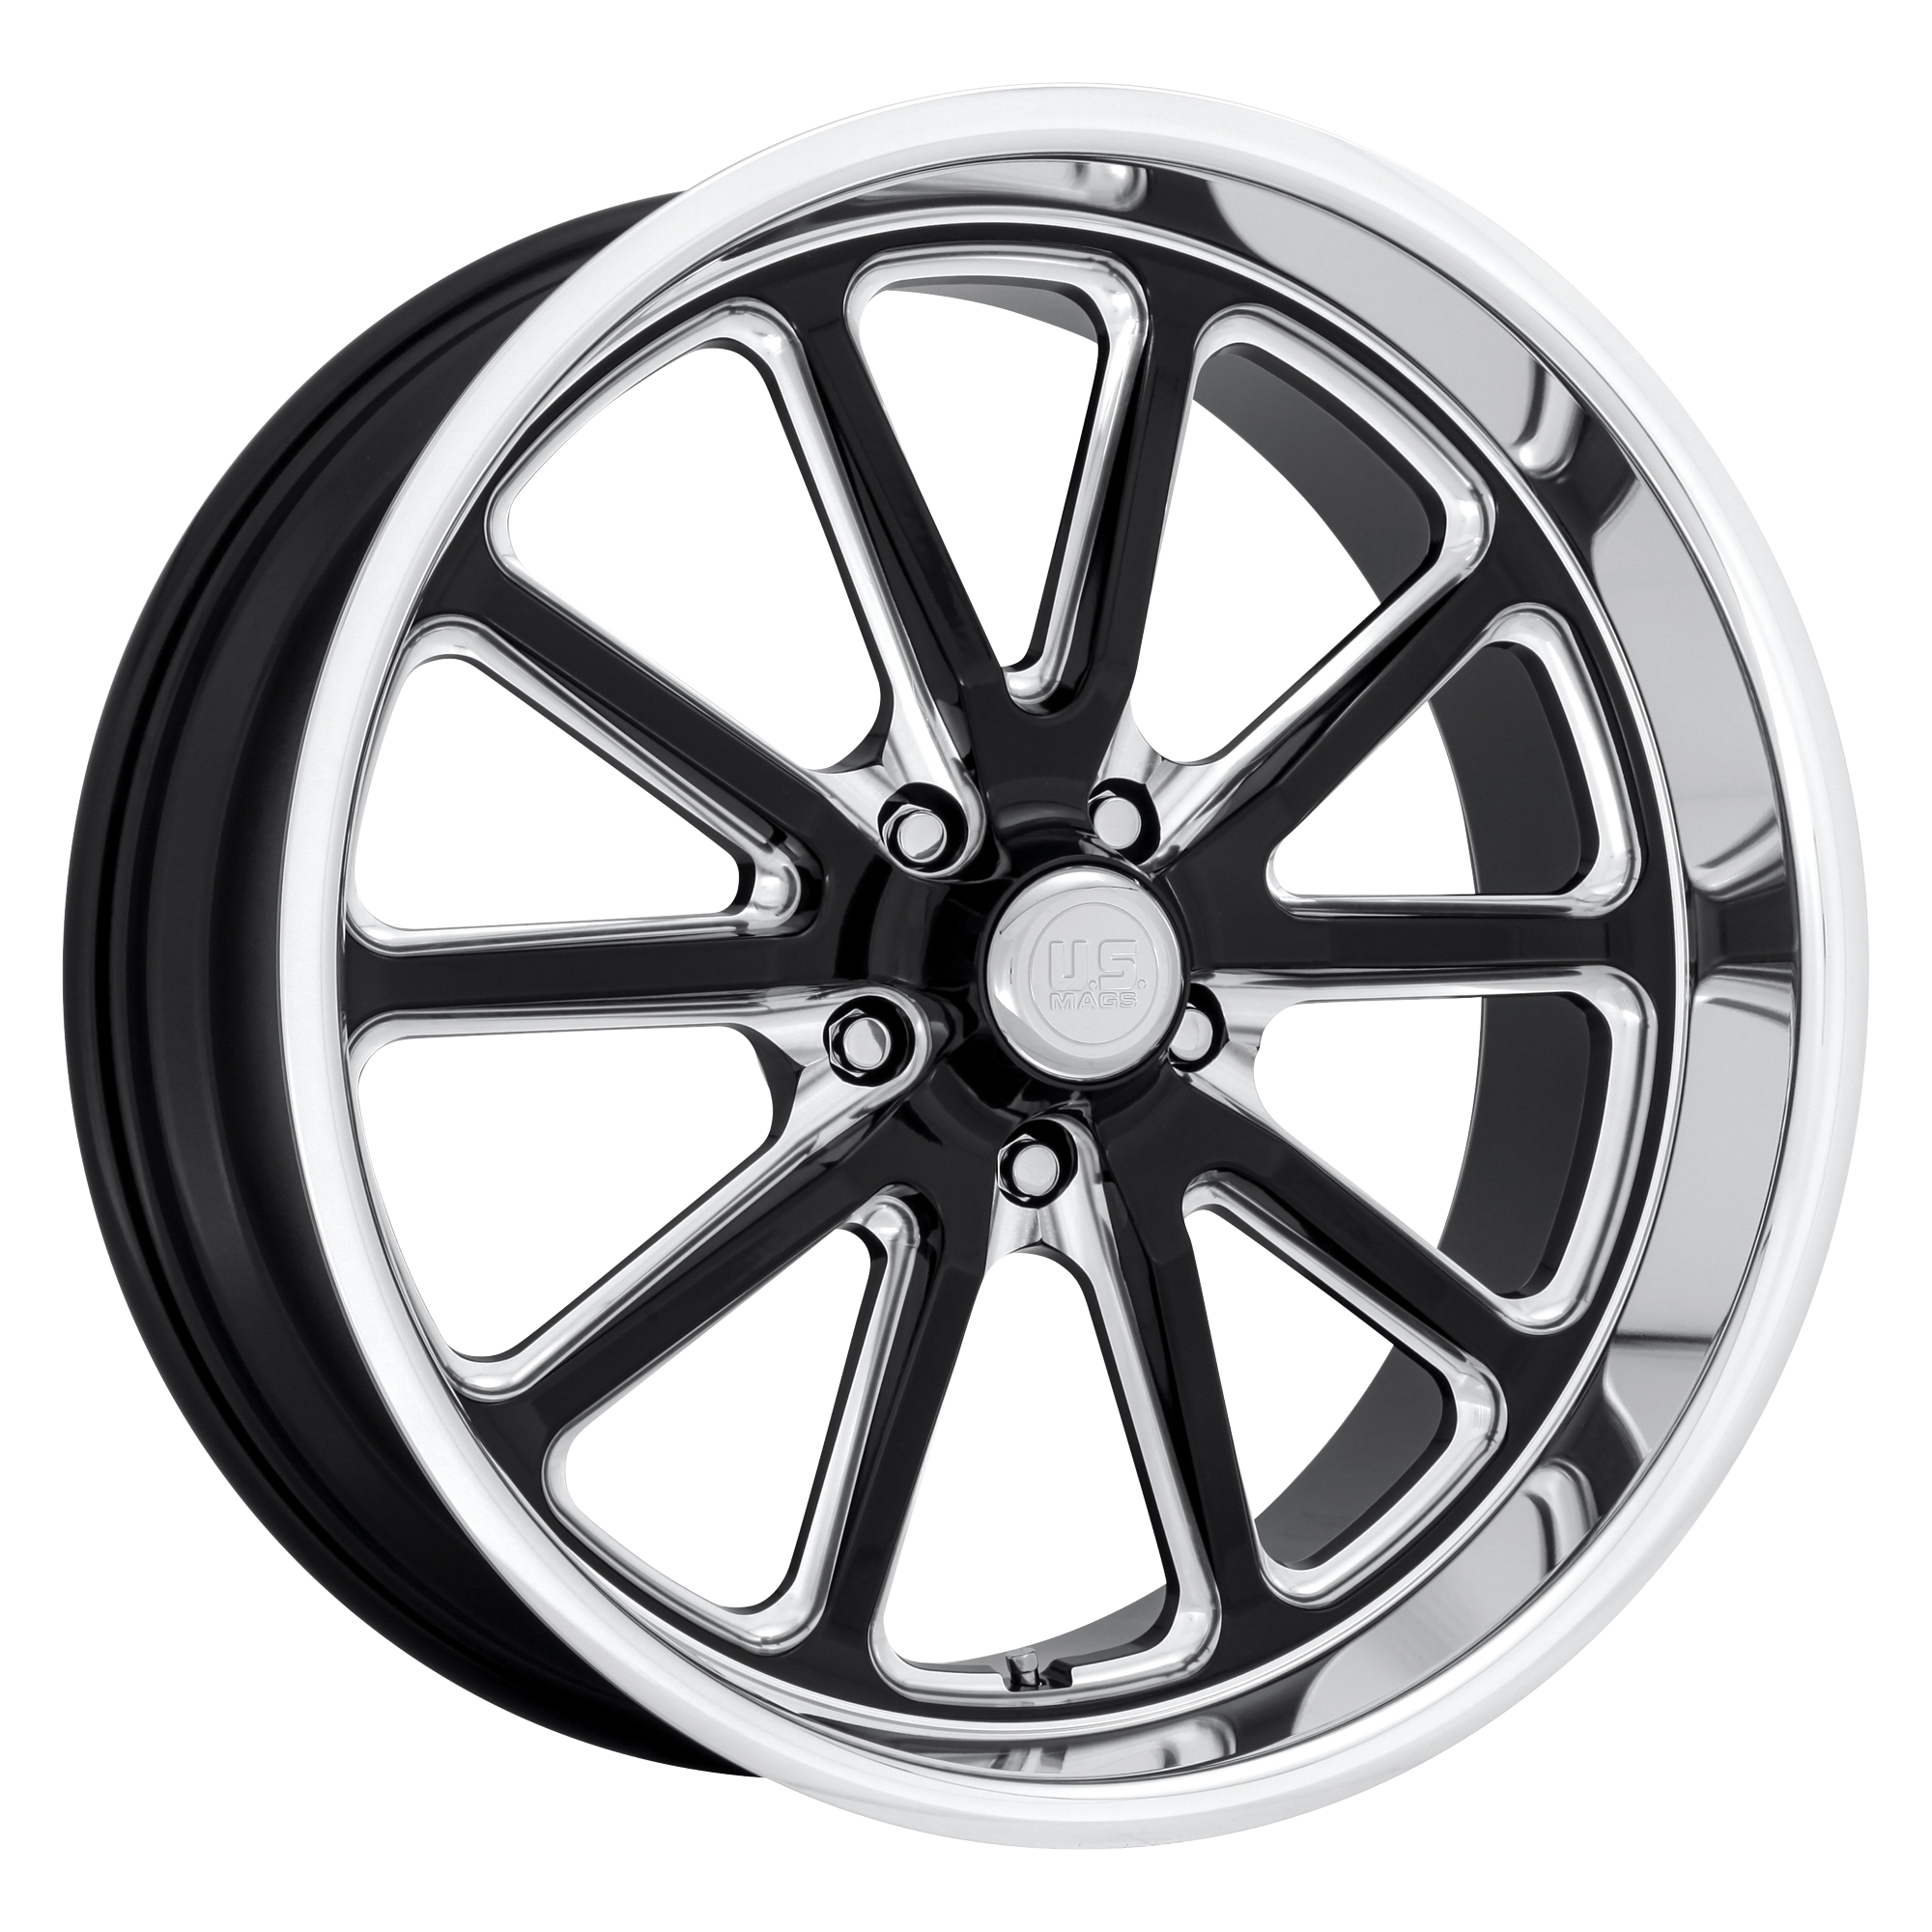 RAMBLER 18x9.5 5x120.65 GLOSS BLACK MILLED (1 mm) - Tires and Engine Performance